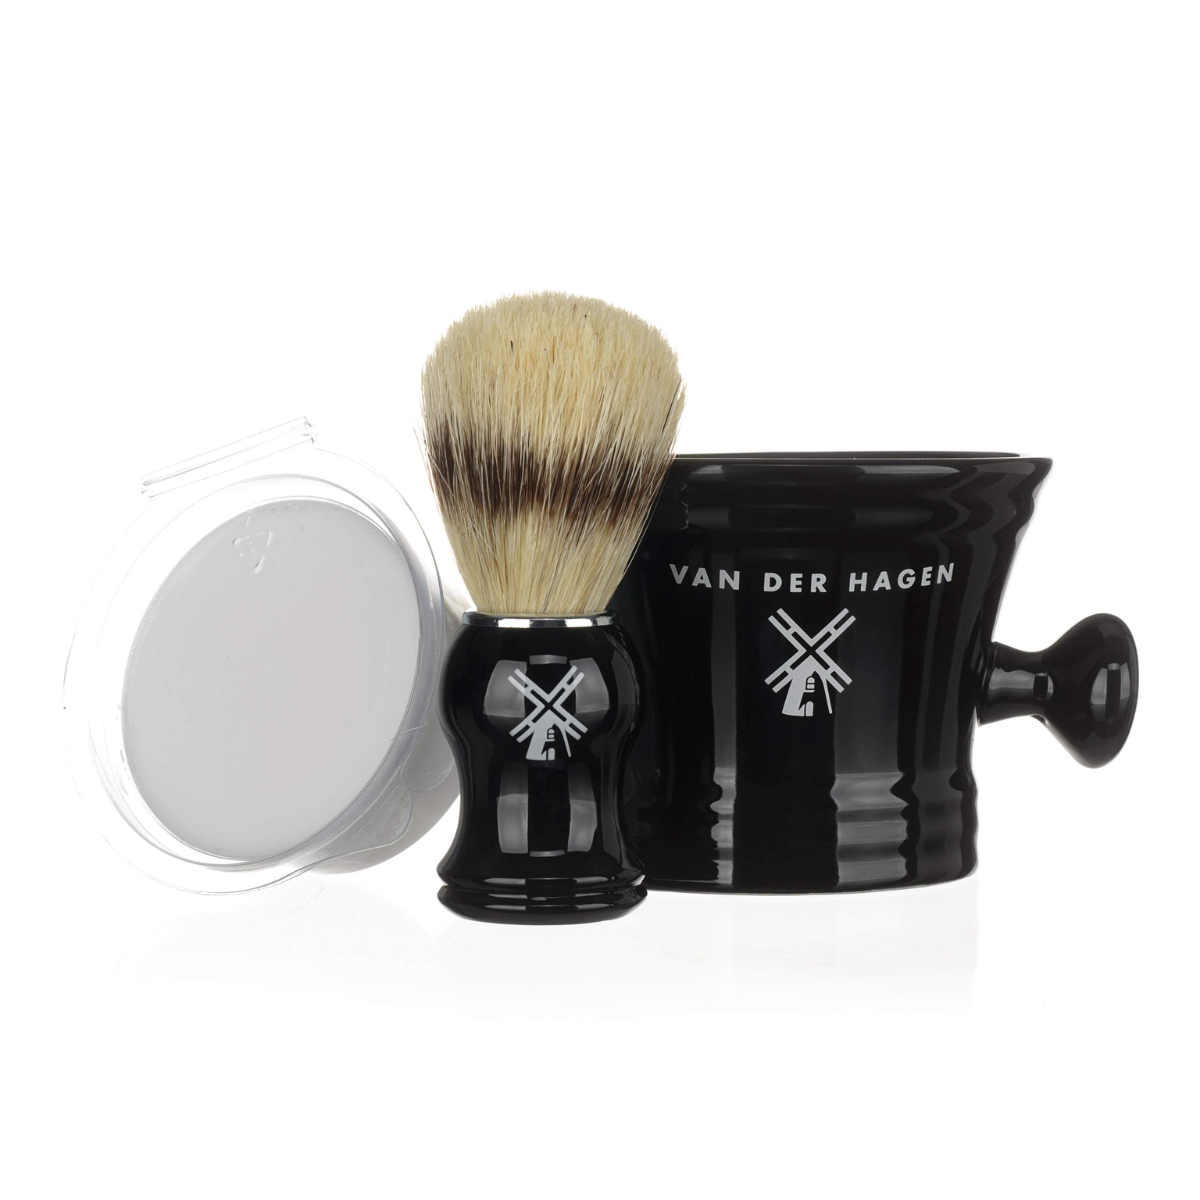 10. Traditional Shaving Kit: A Unique and Thoughtful 15 Year Anniversary Gift for Him